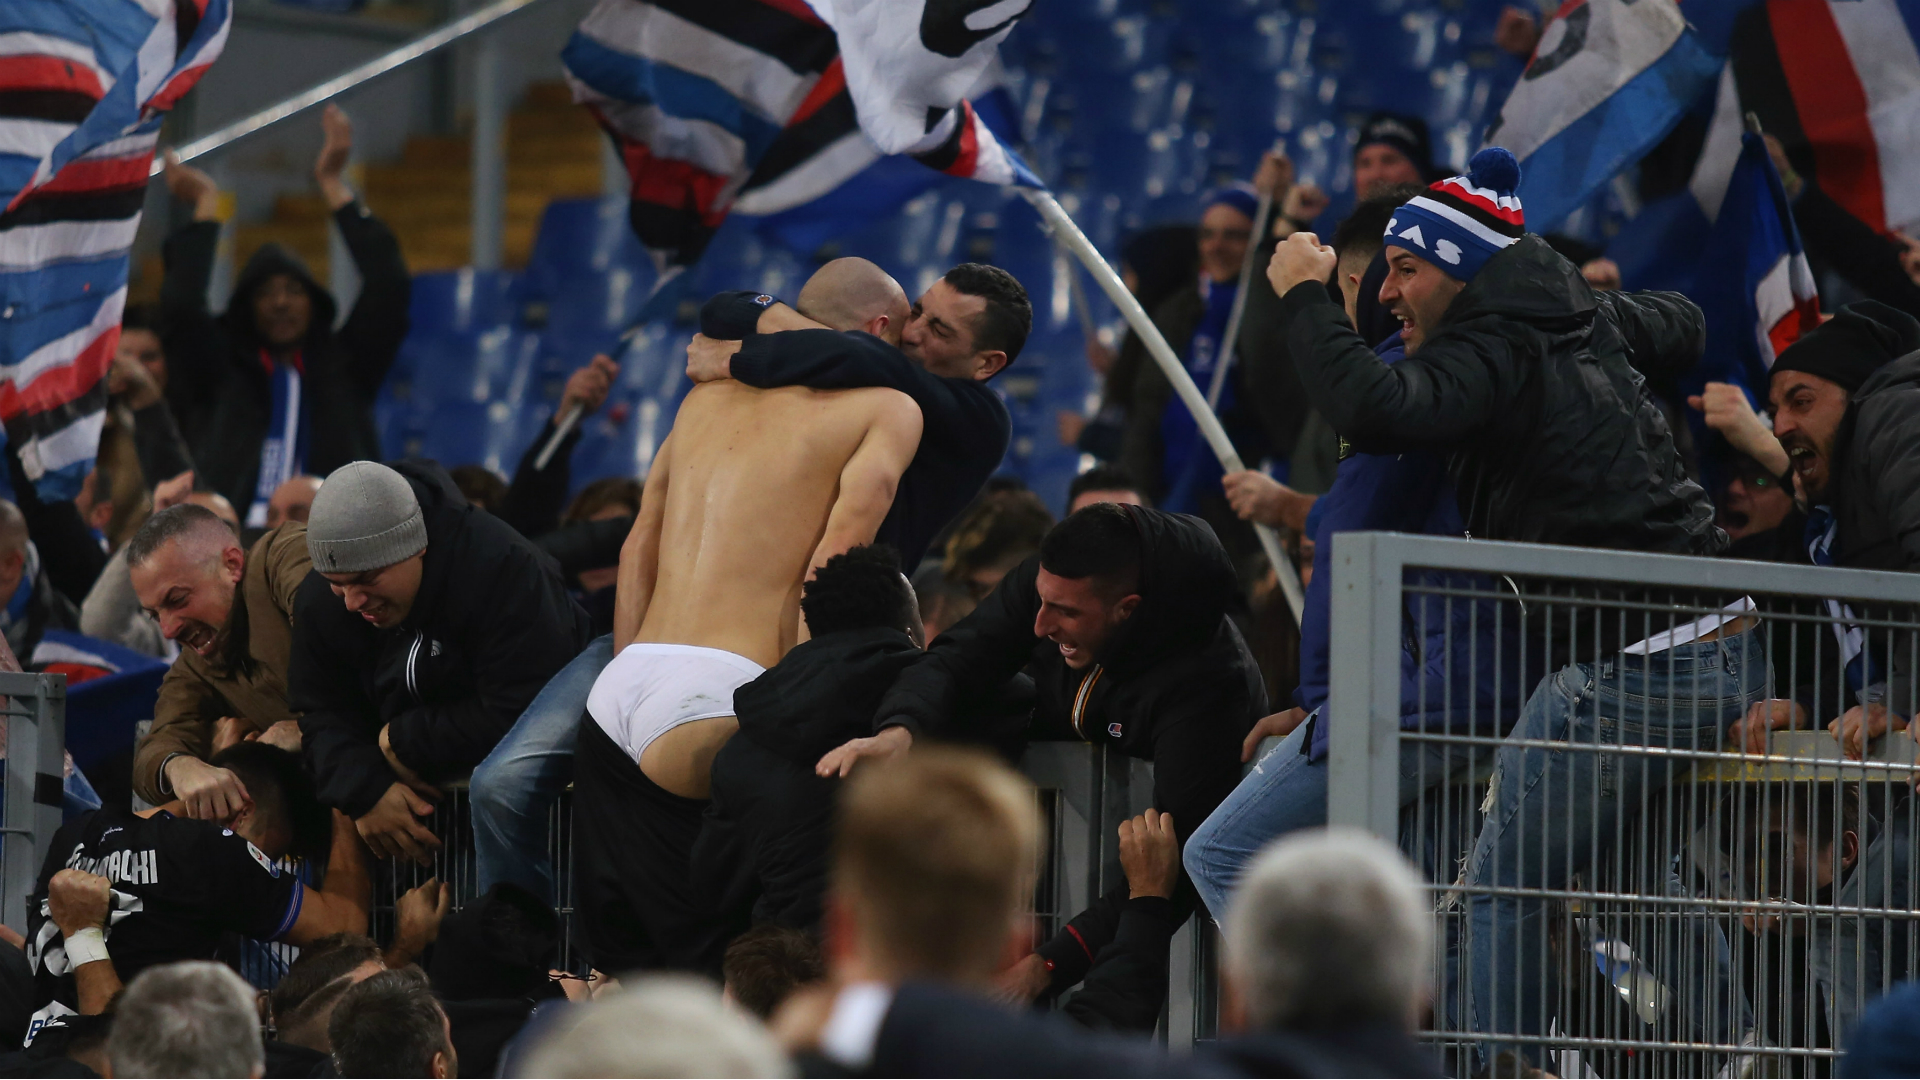 Sampdoria hit an equaliser in the 99th minute to claim a 2-2 draw against Lazio, with the goal memorably celebrated by Riccardo Saponara.